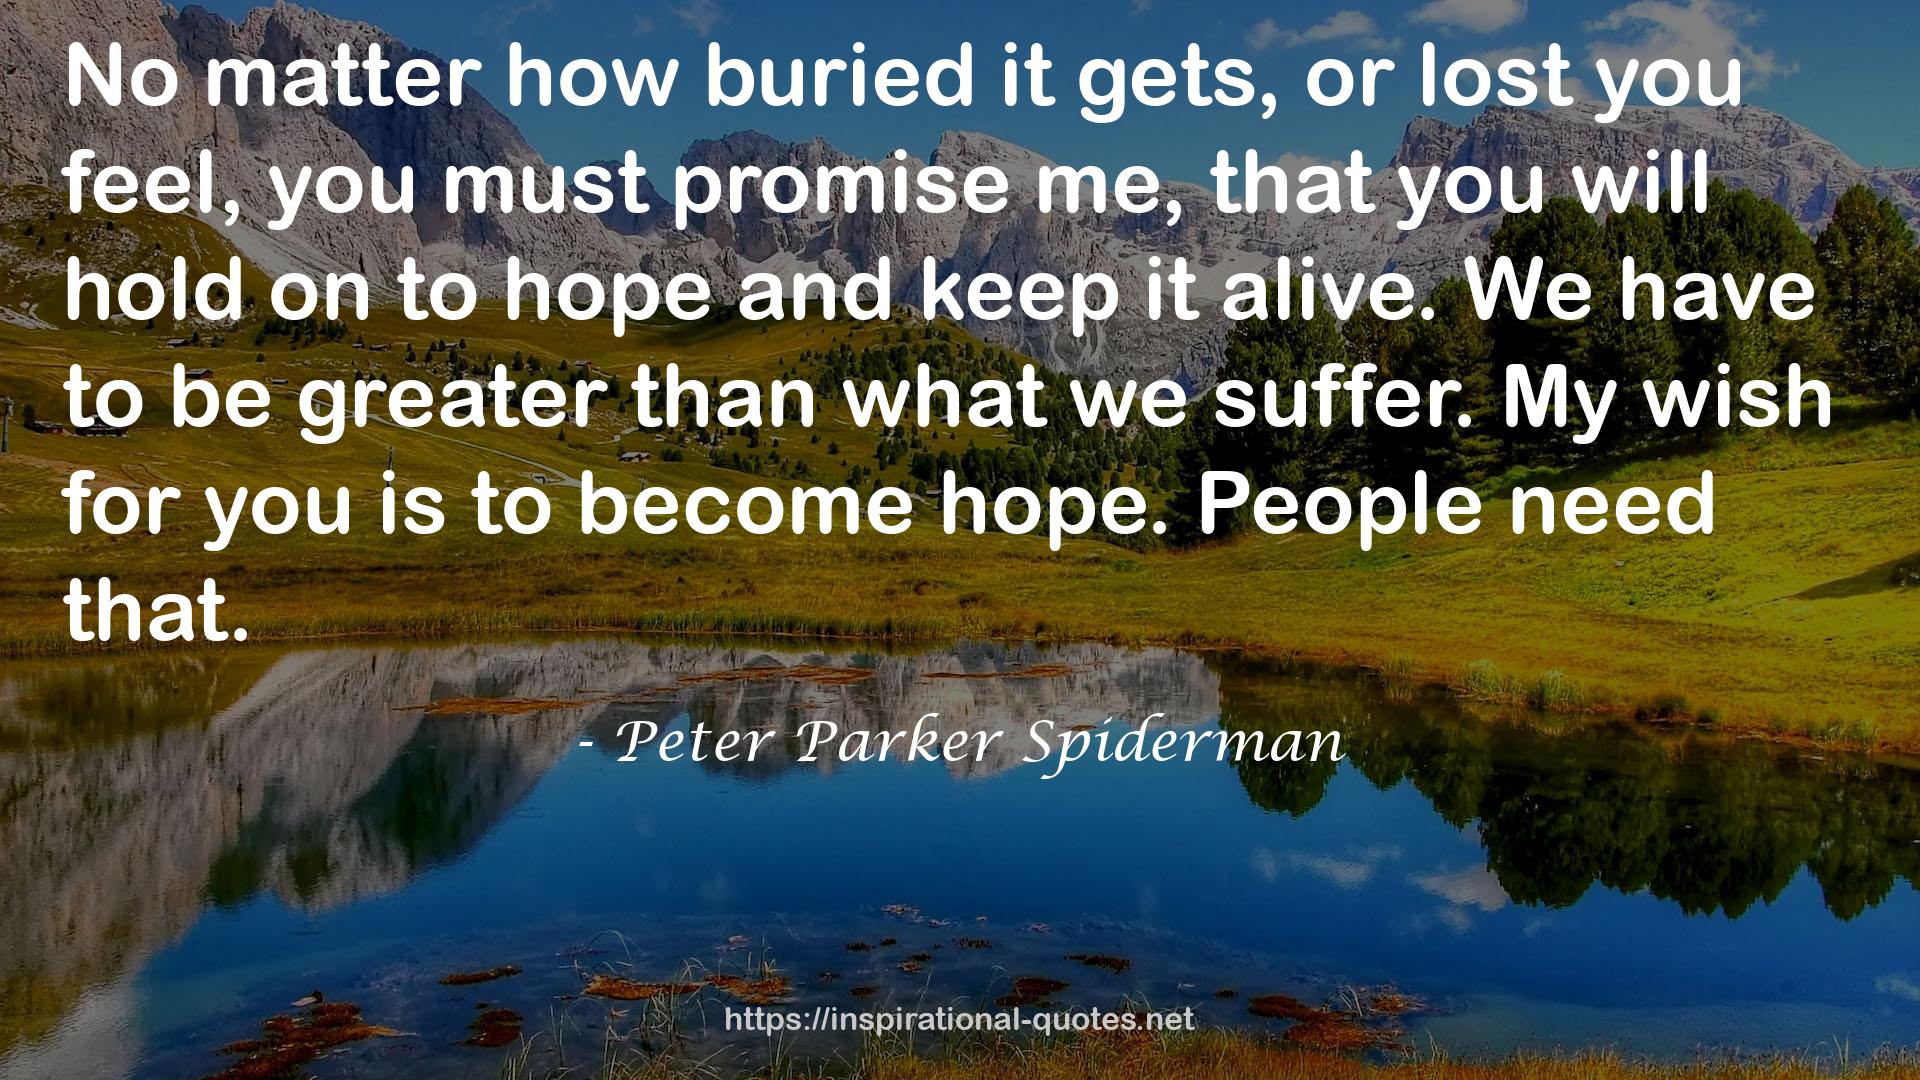 Peter Parker Spiderman QUOTES